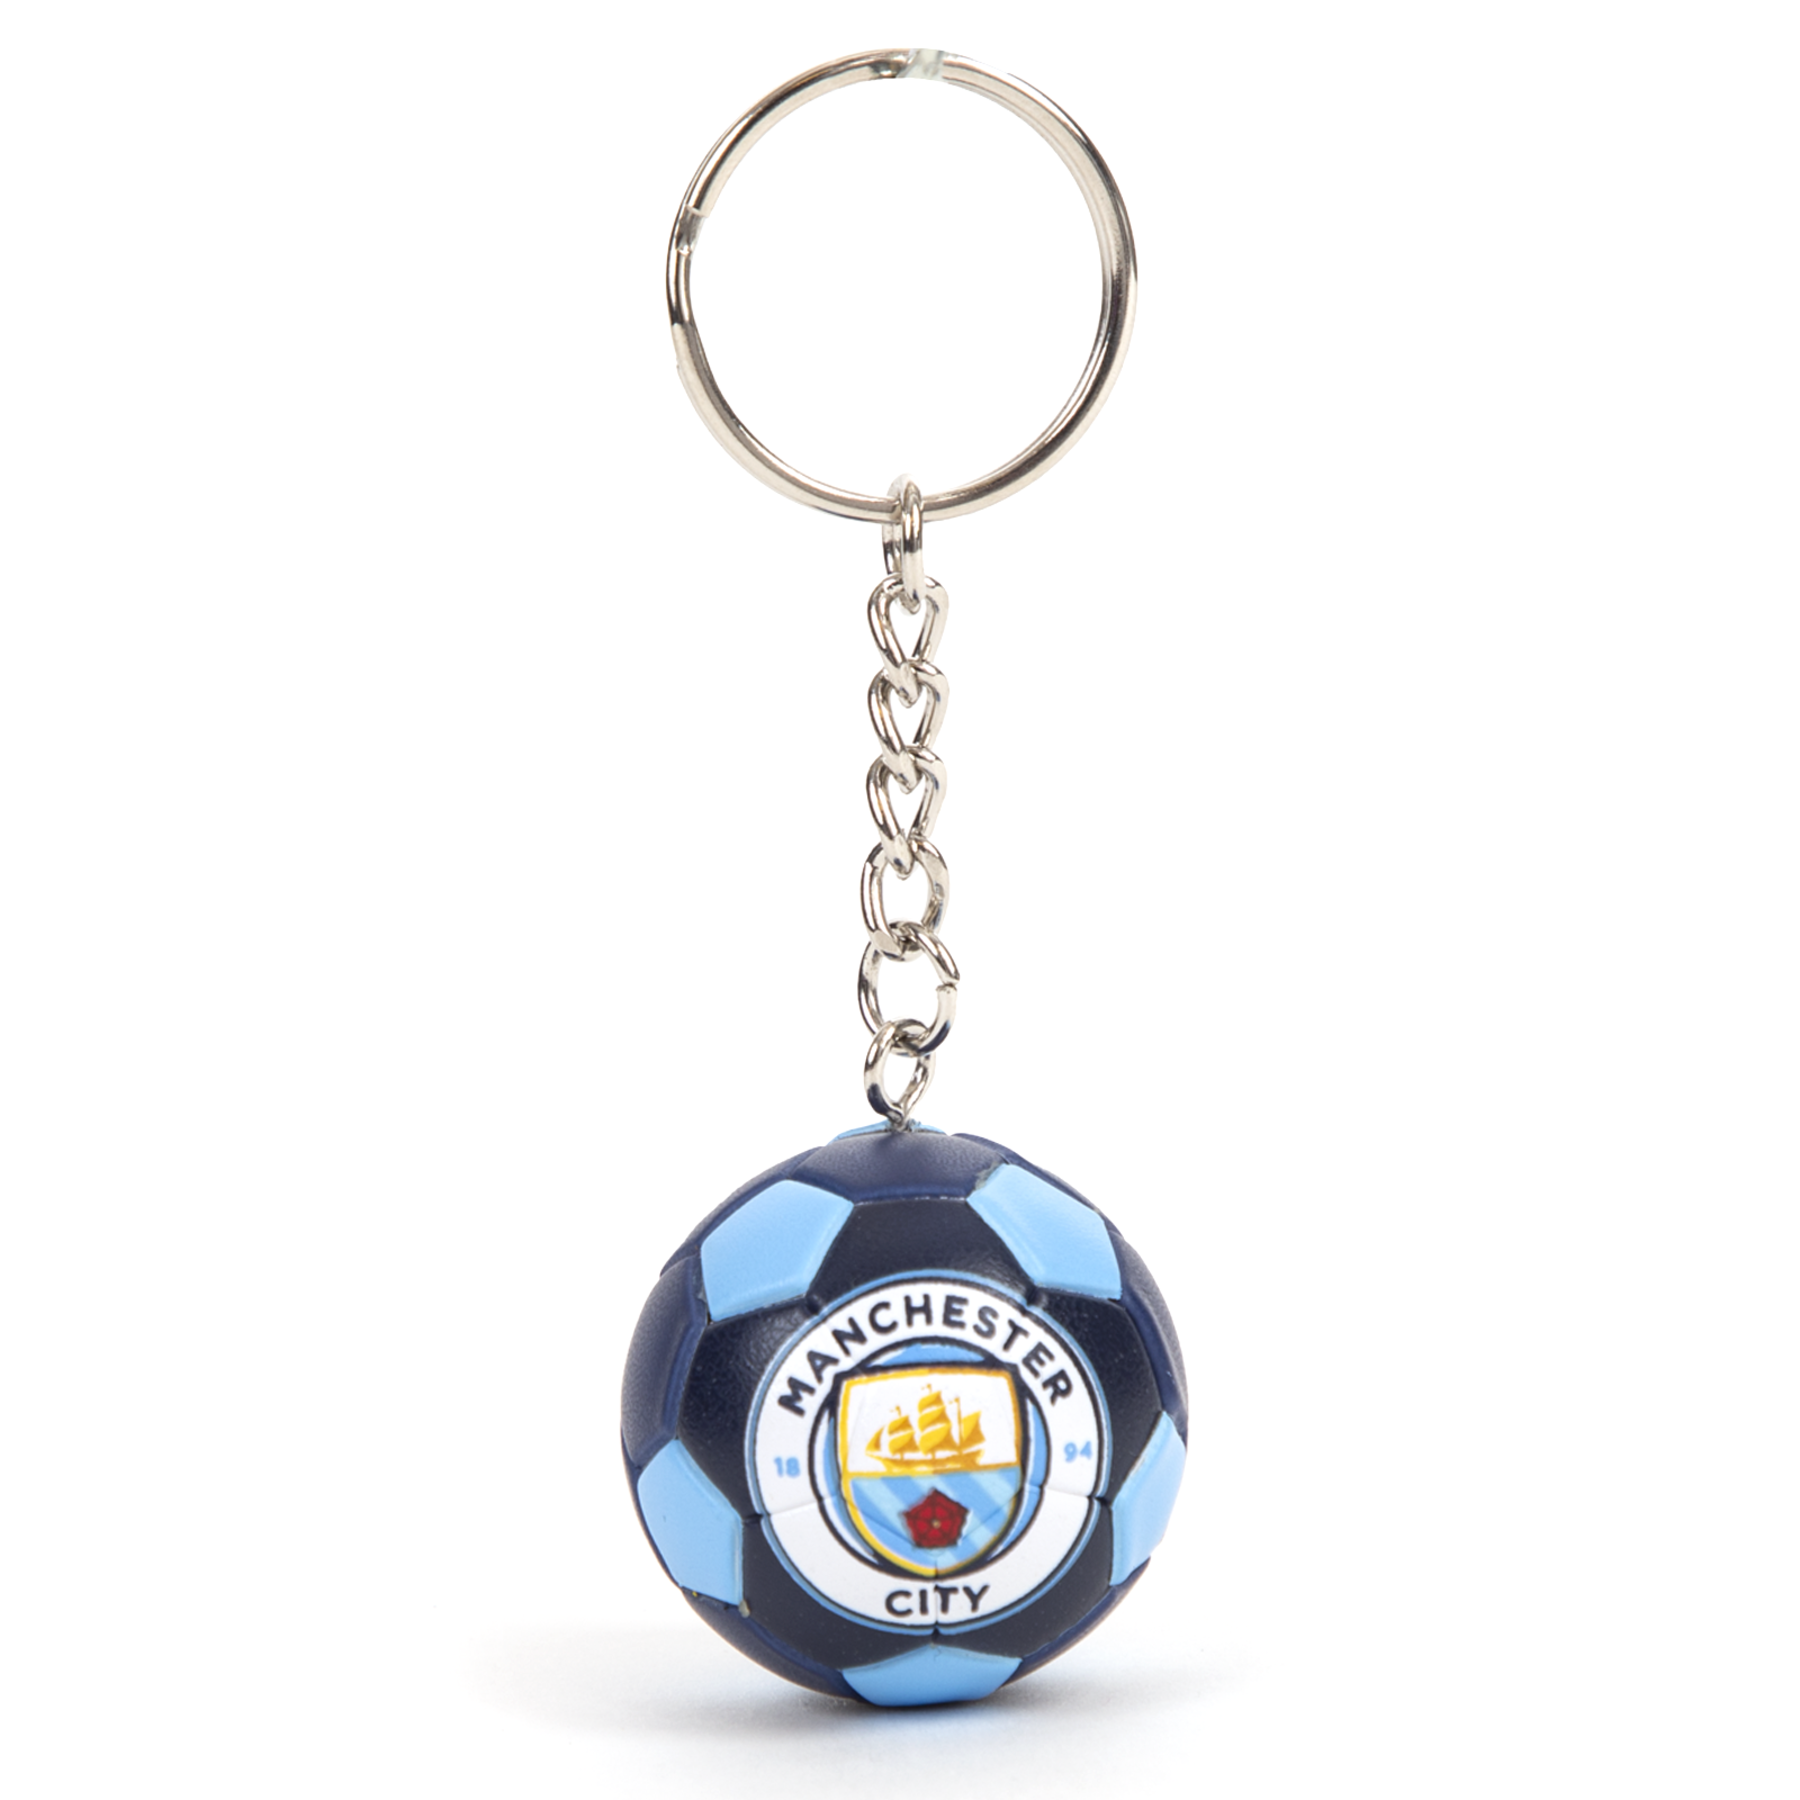 Manchester City Torch Light Bottle Opener Keyring Multi-Colour by Manchester City F.C.